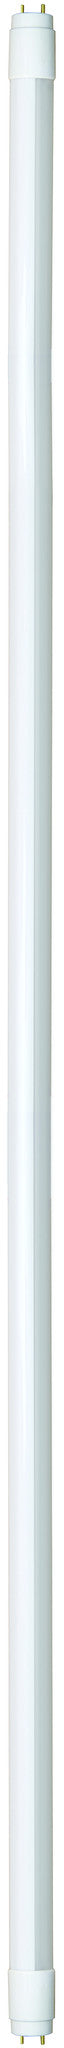 167370 - EcoWatts - Tube LED T8 G13 90cm 14W 4000K 1200Lm  The Lampco - The Lamp Company